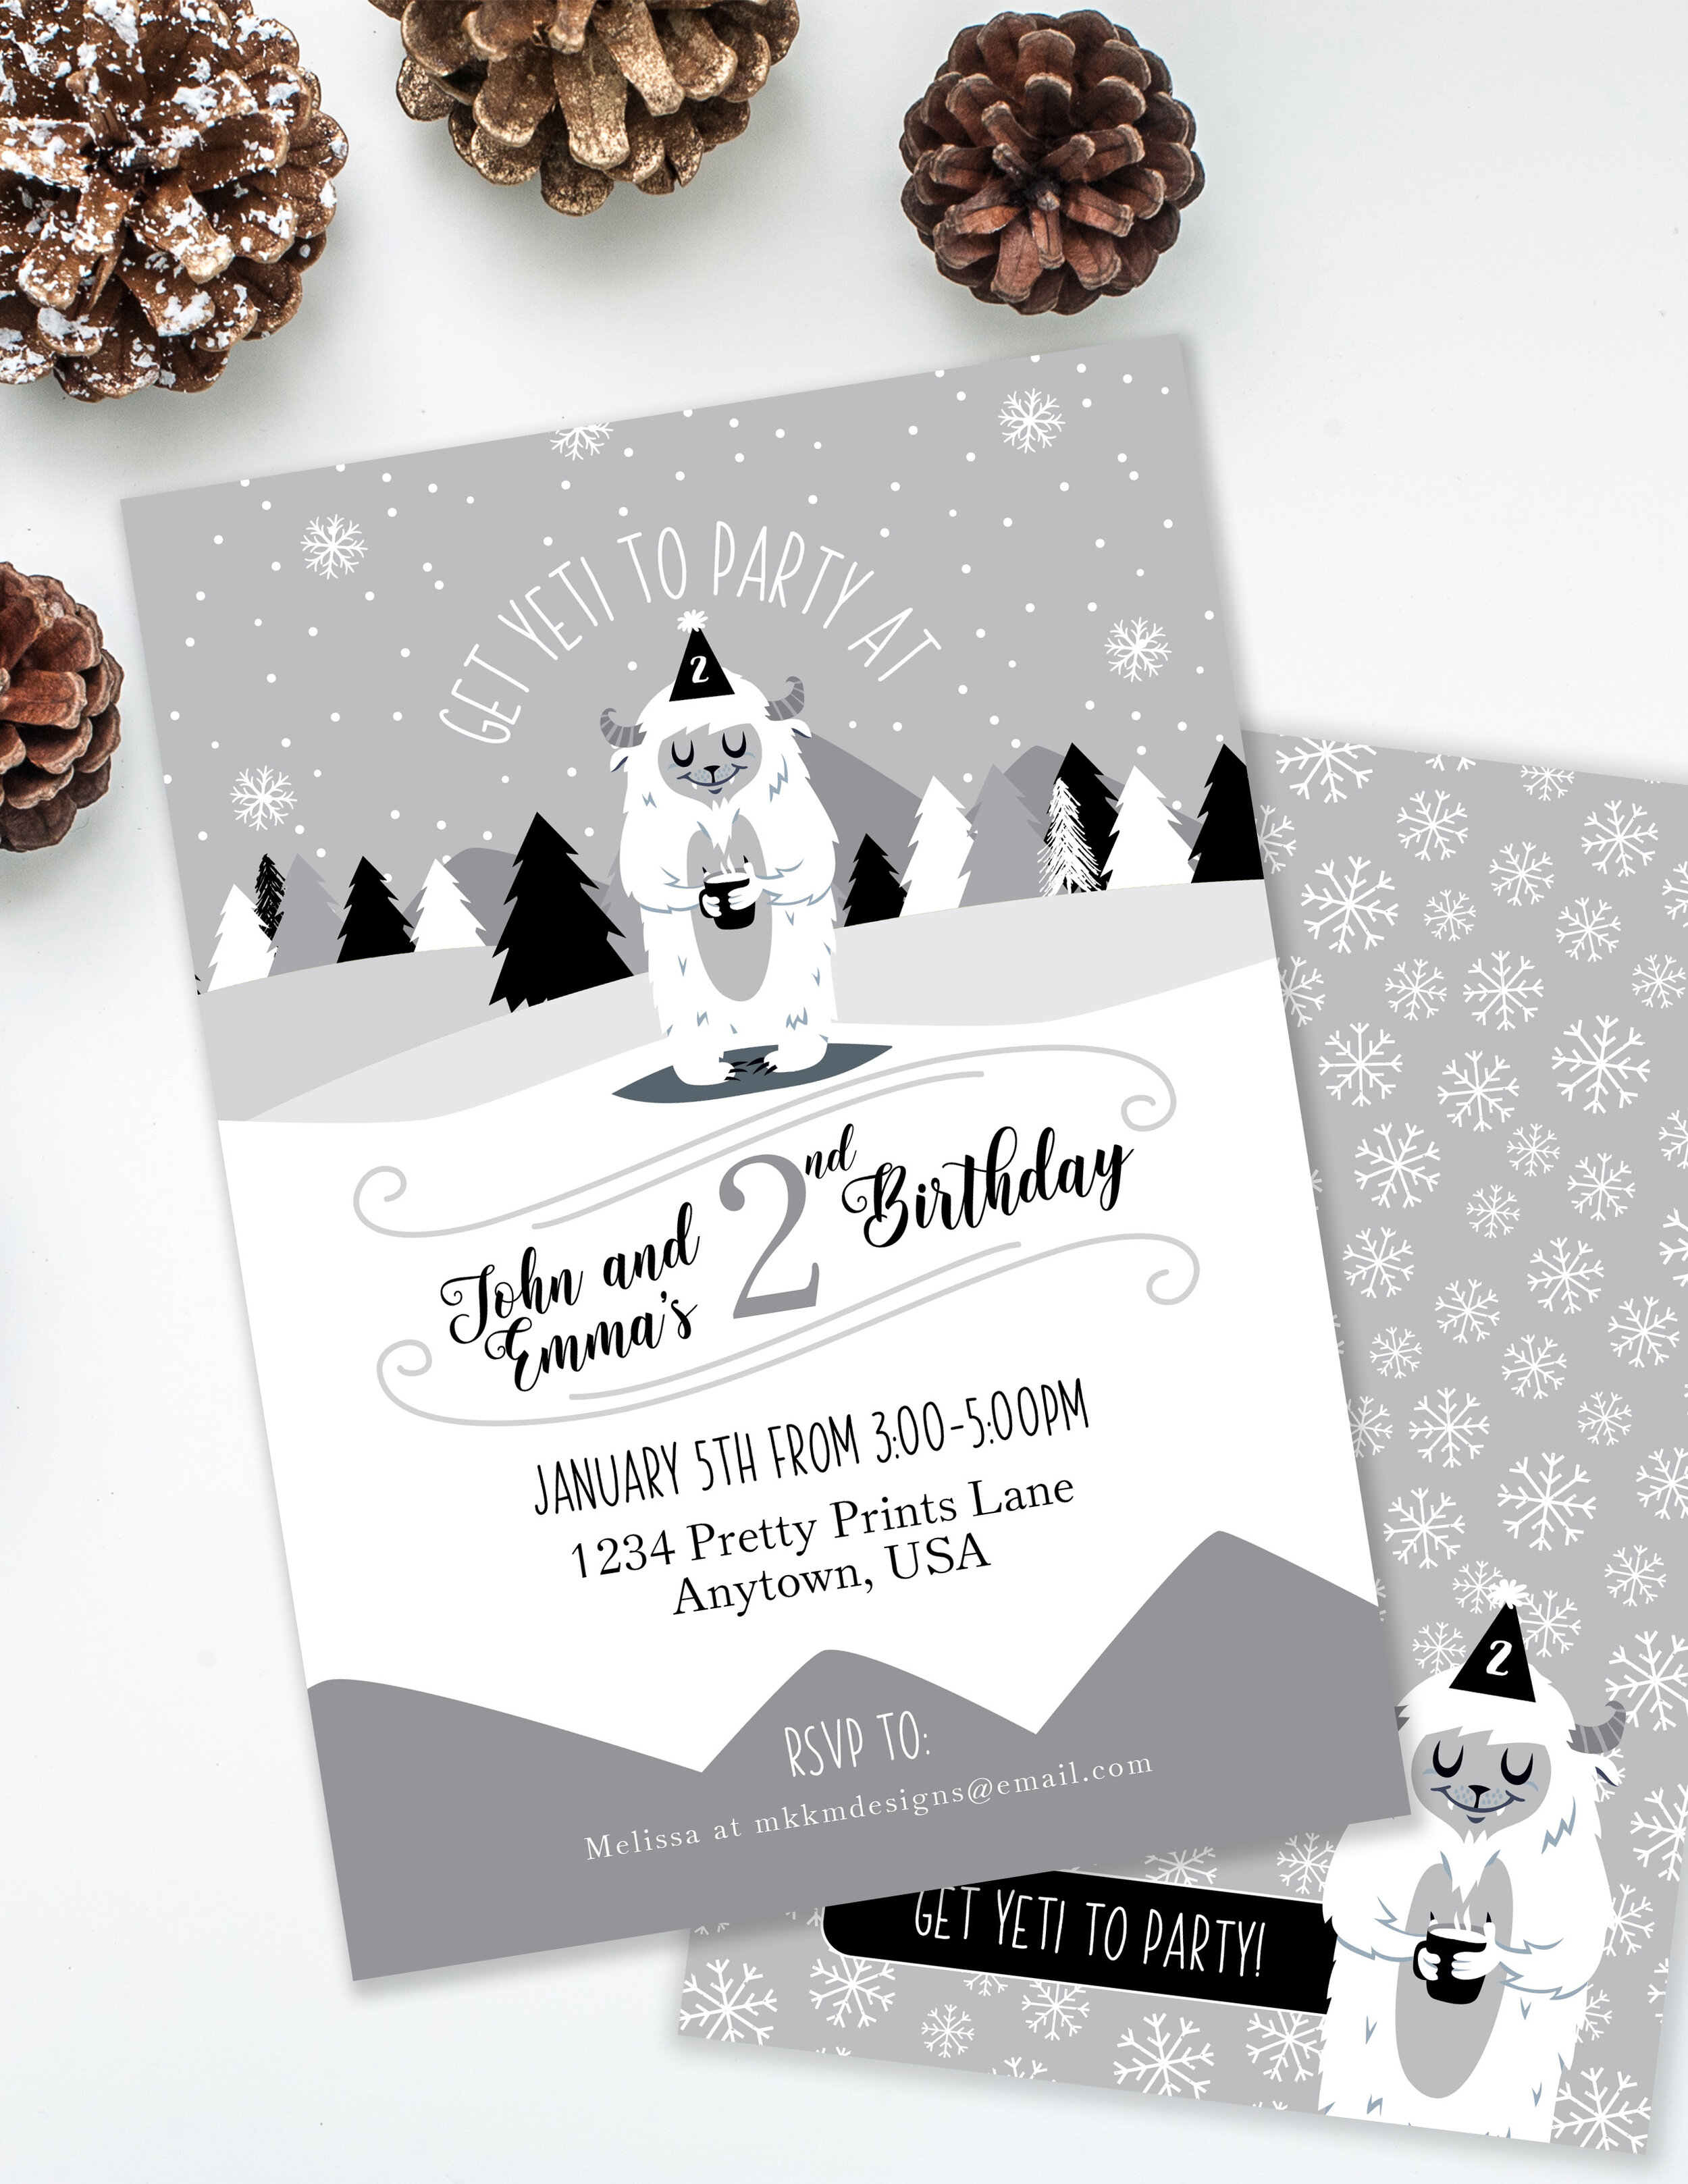 Modern Yeti party invitation for a winter birthday // merry and grace design co.